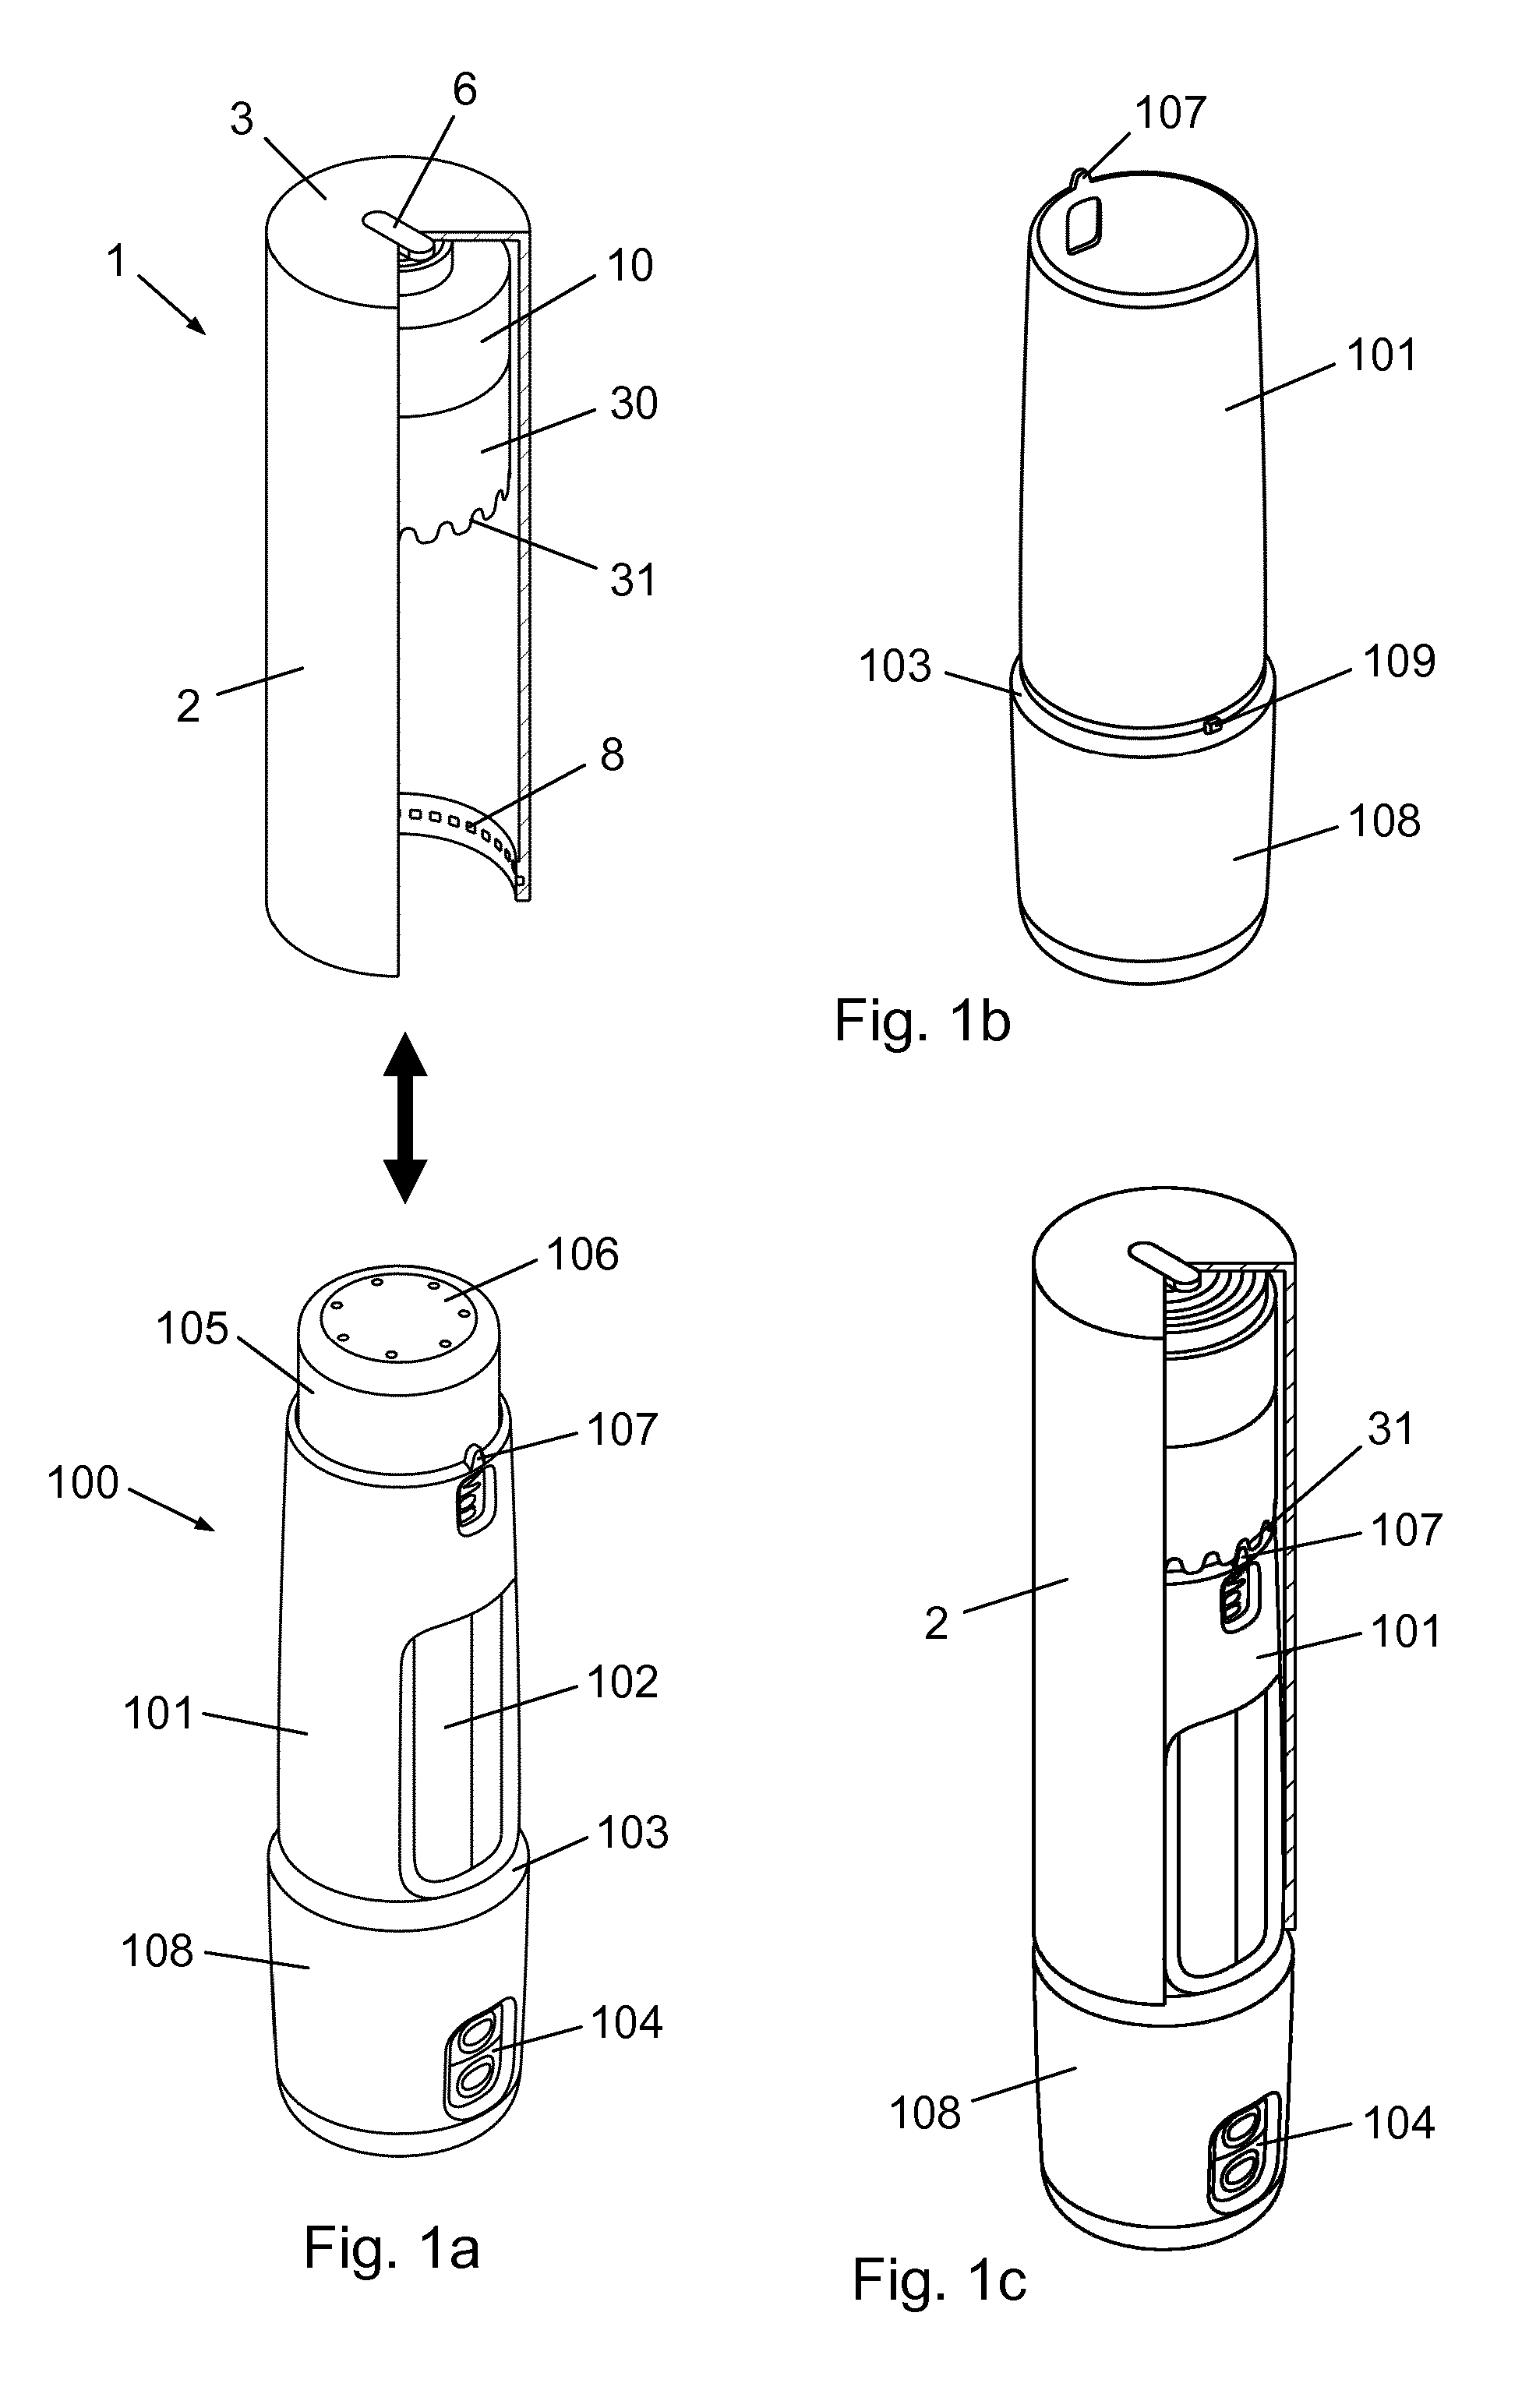 State Changing Appliance for a Drug Delivery Device